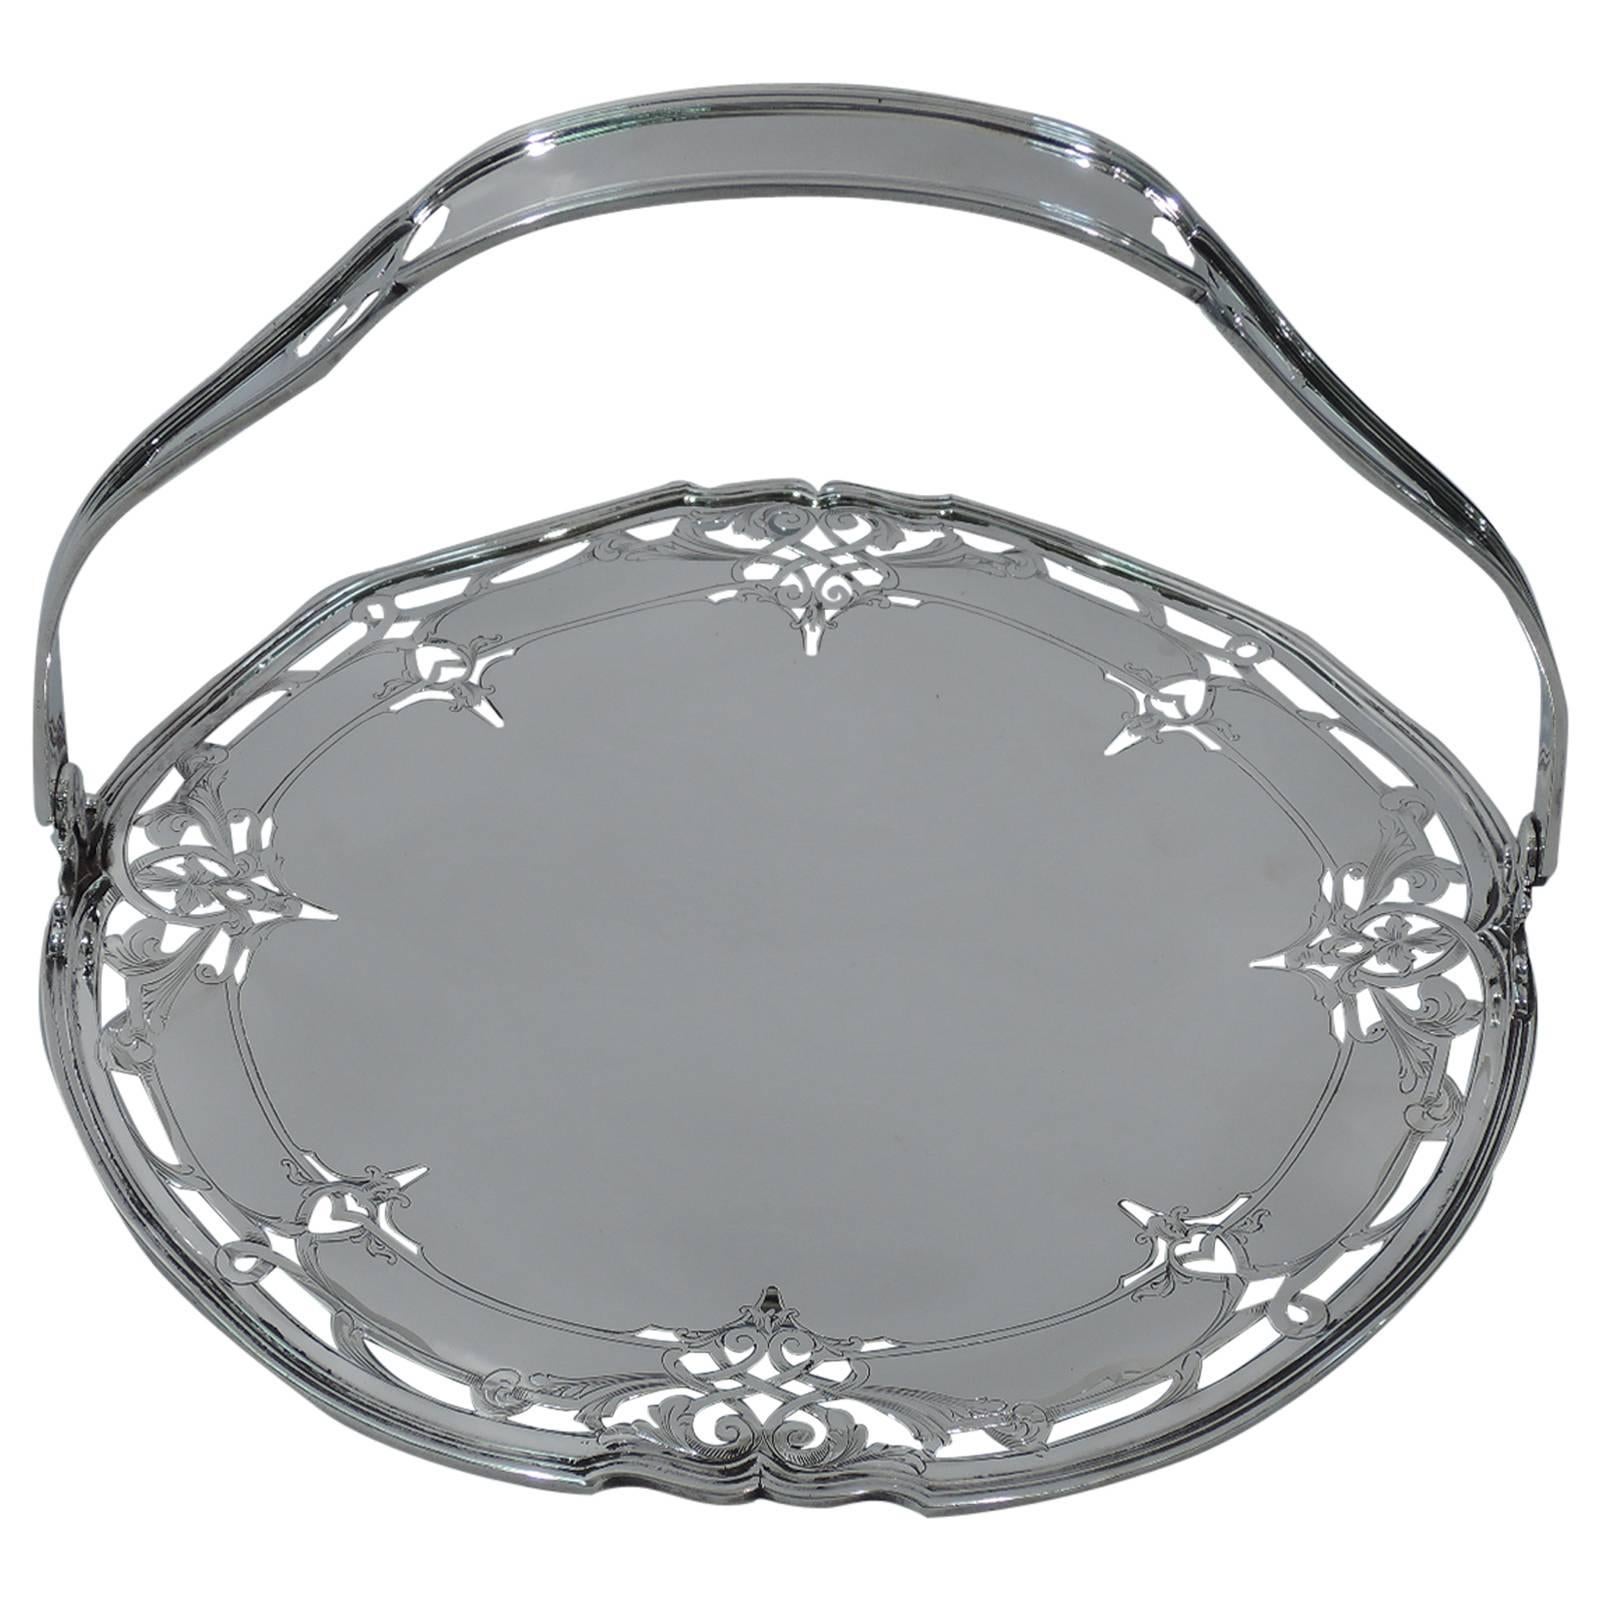 Lovely Sterling Silver Cake Plate by Reed & Barton